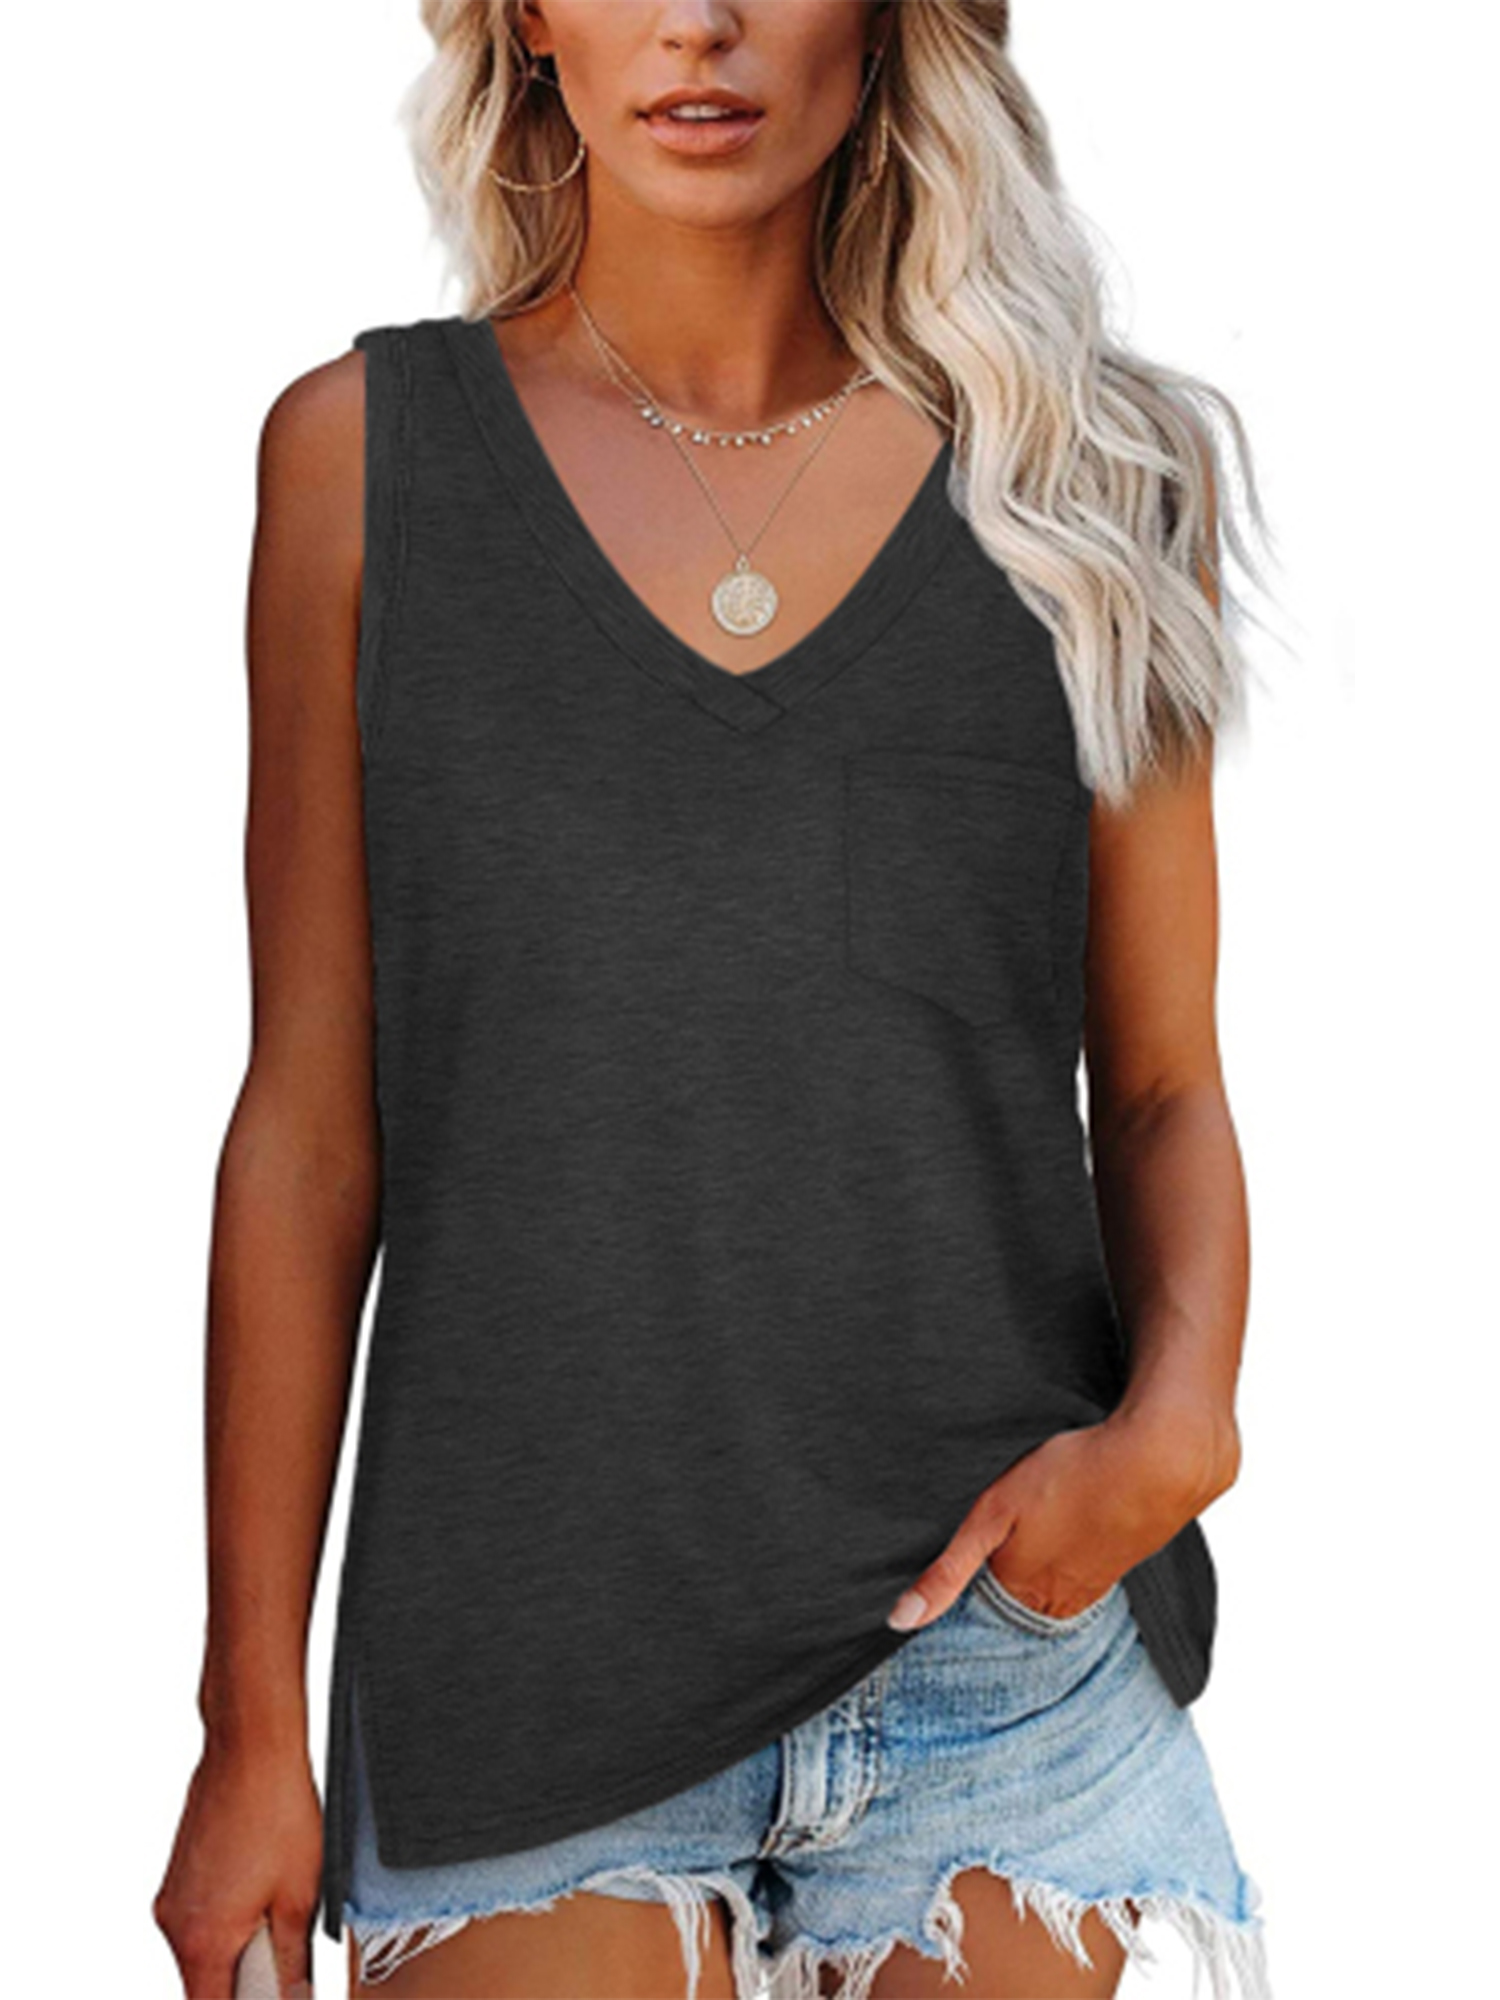 RQYYD Clearance Tank Top for Women Keyhole V Neck Sleeveless Tunic